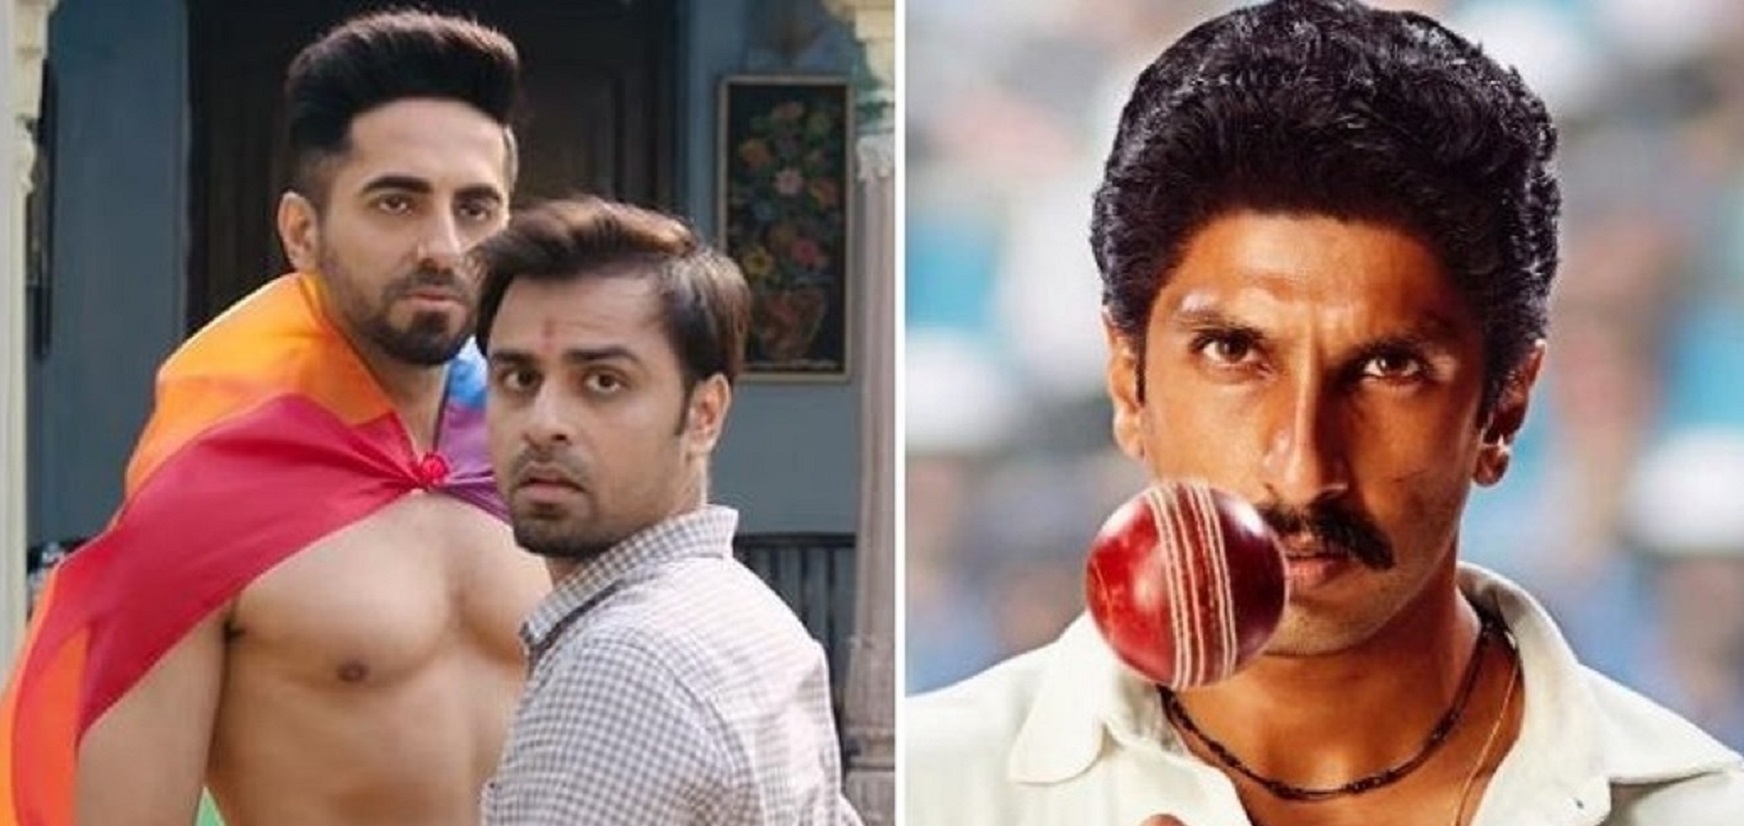 10 Hindi Movies Releasing in 2020, That We’re Excited About!